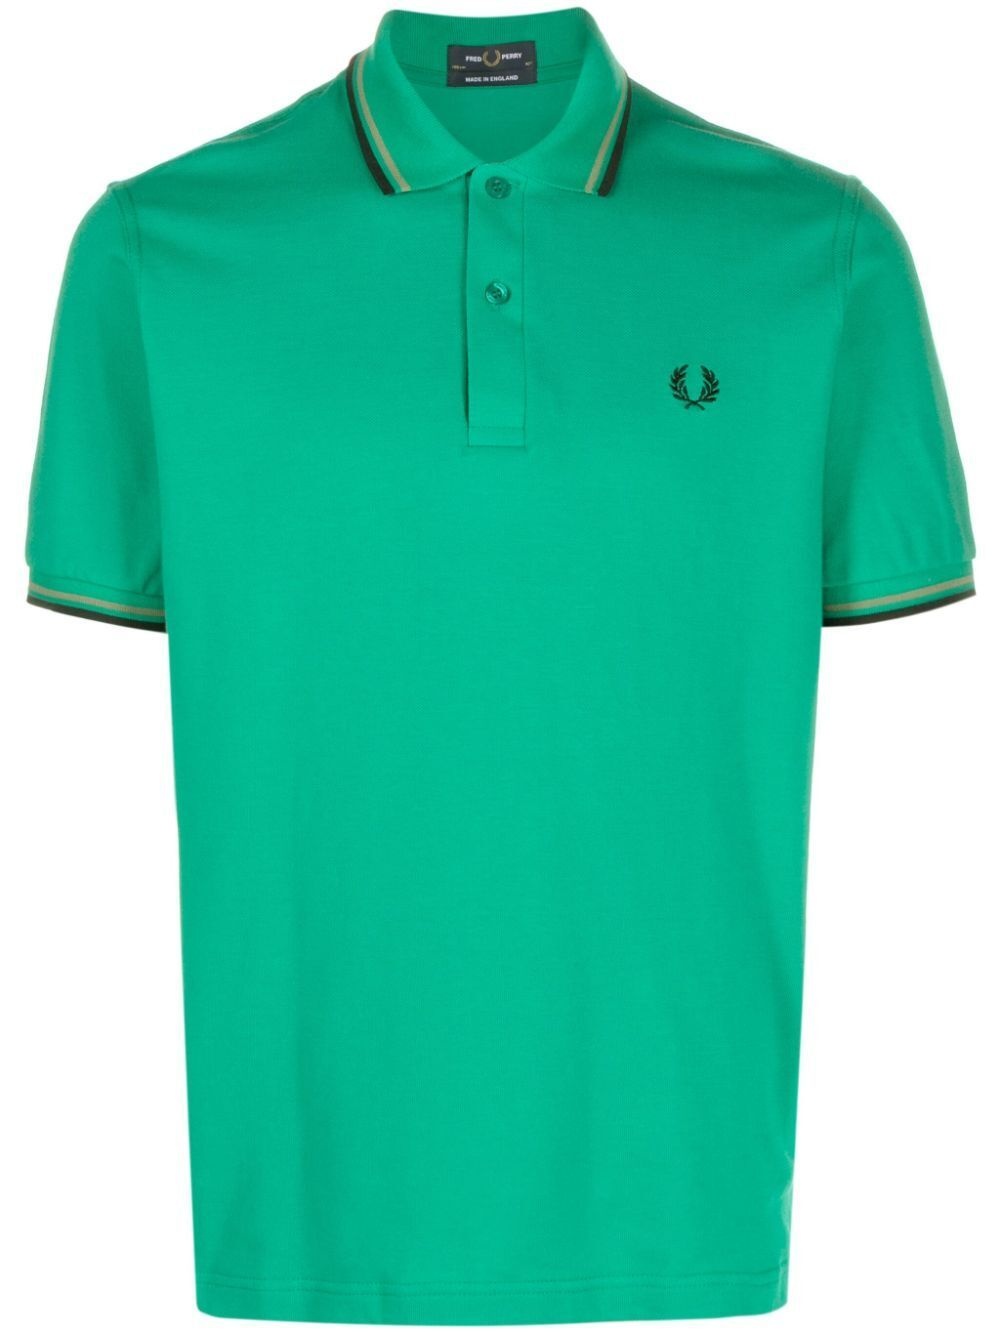 FP TWIN TIPPED FRED PERRY SHIRT - 1